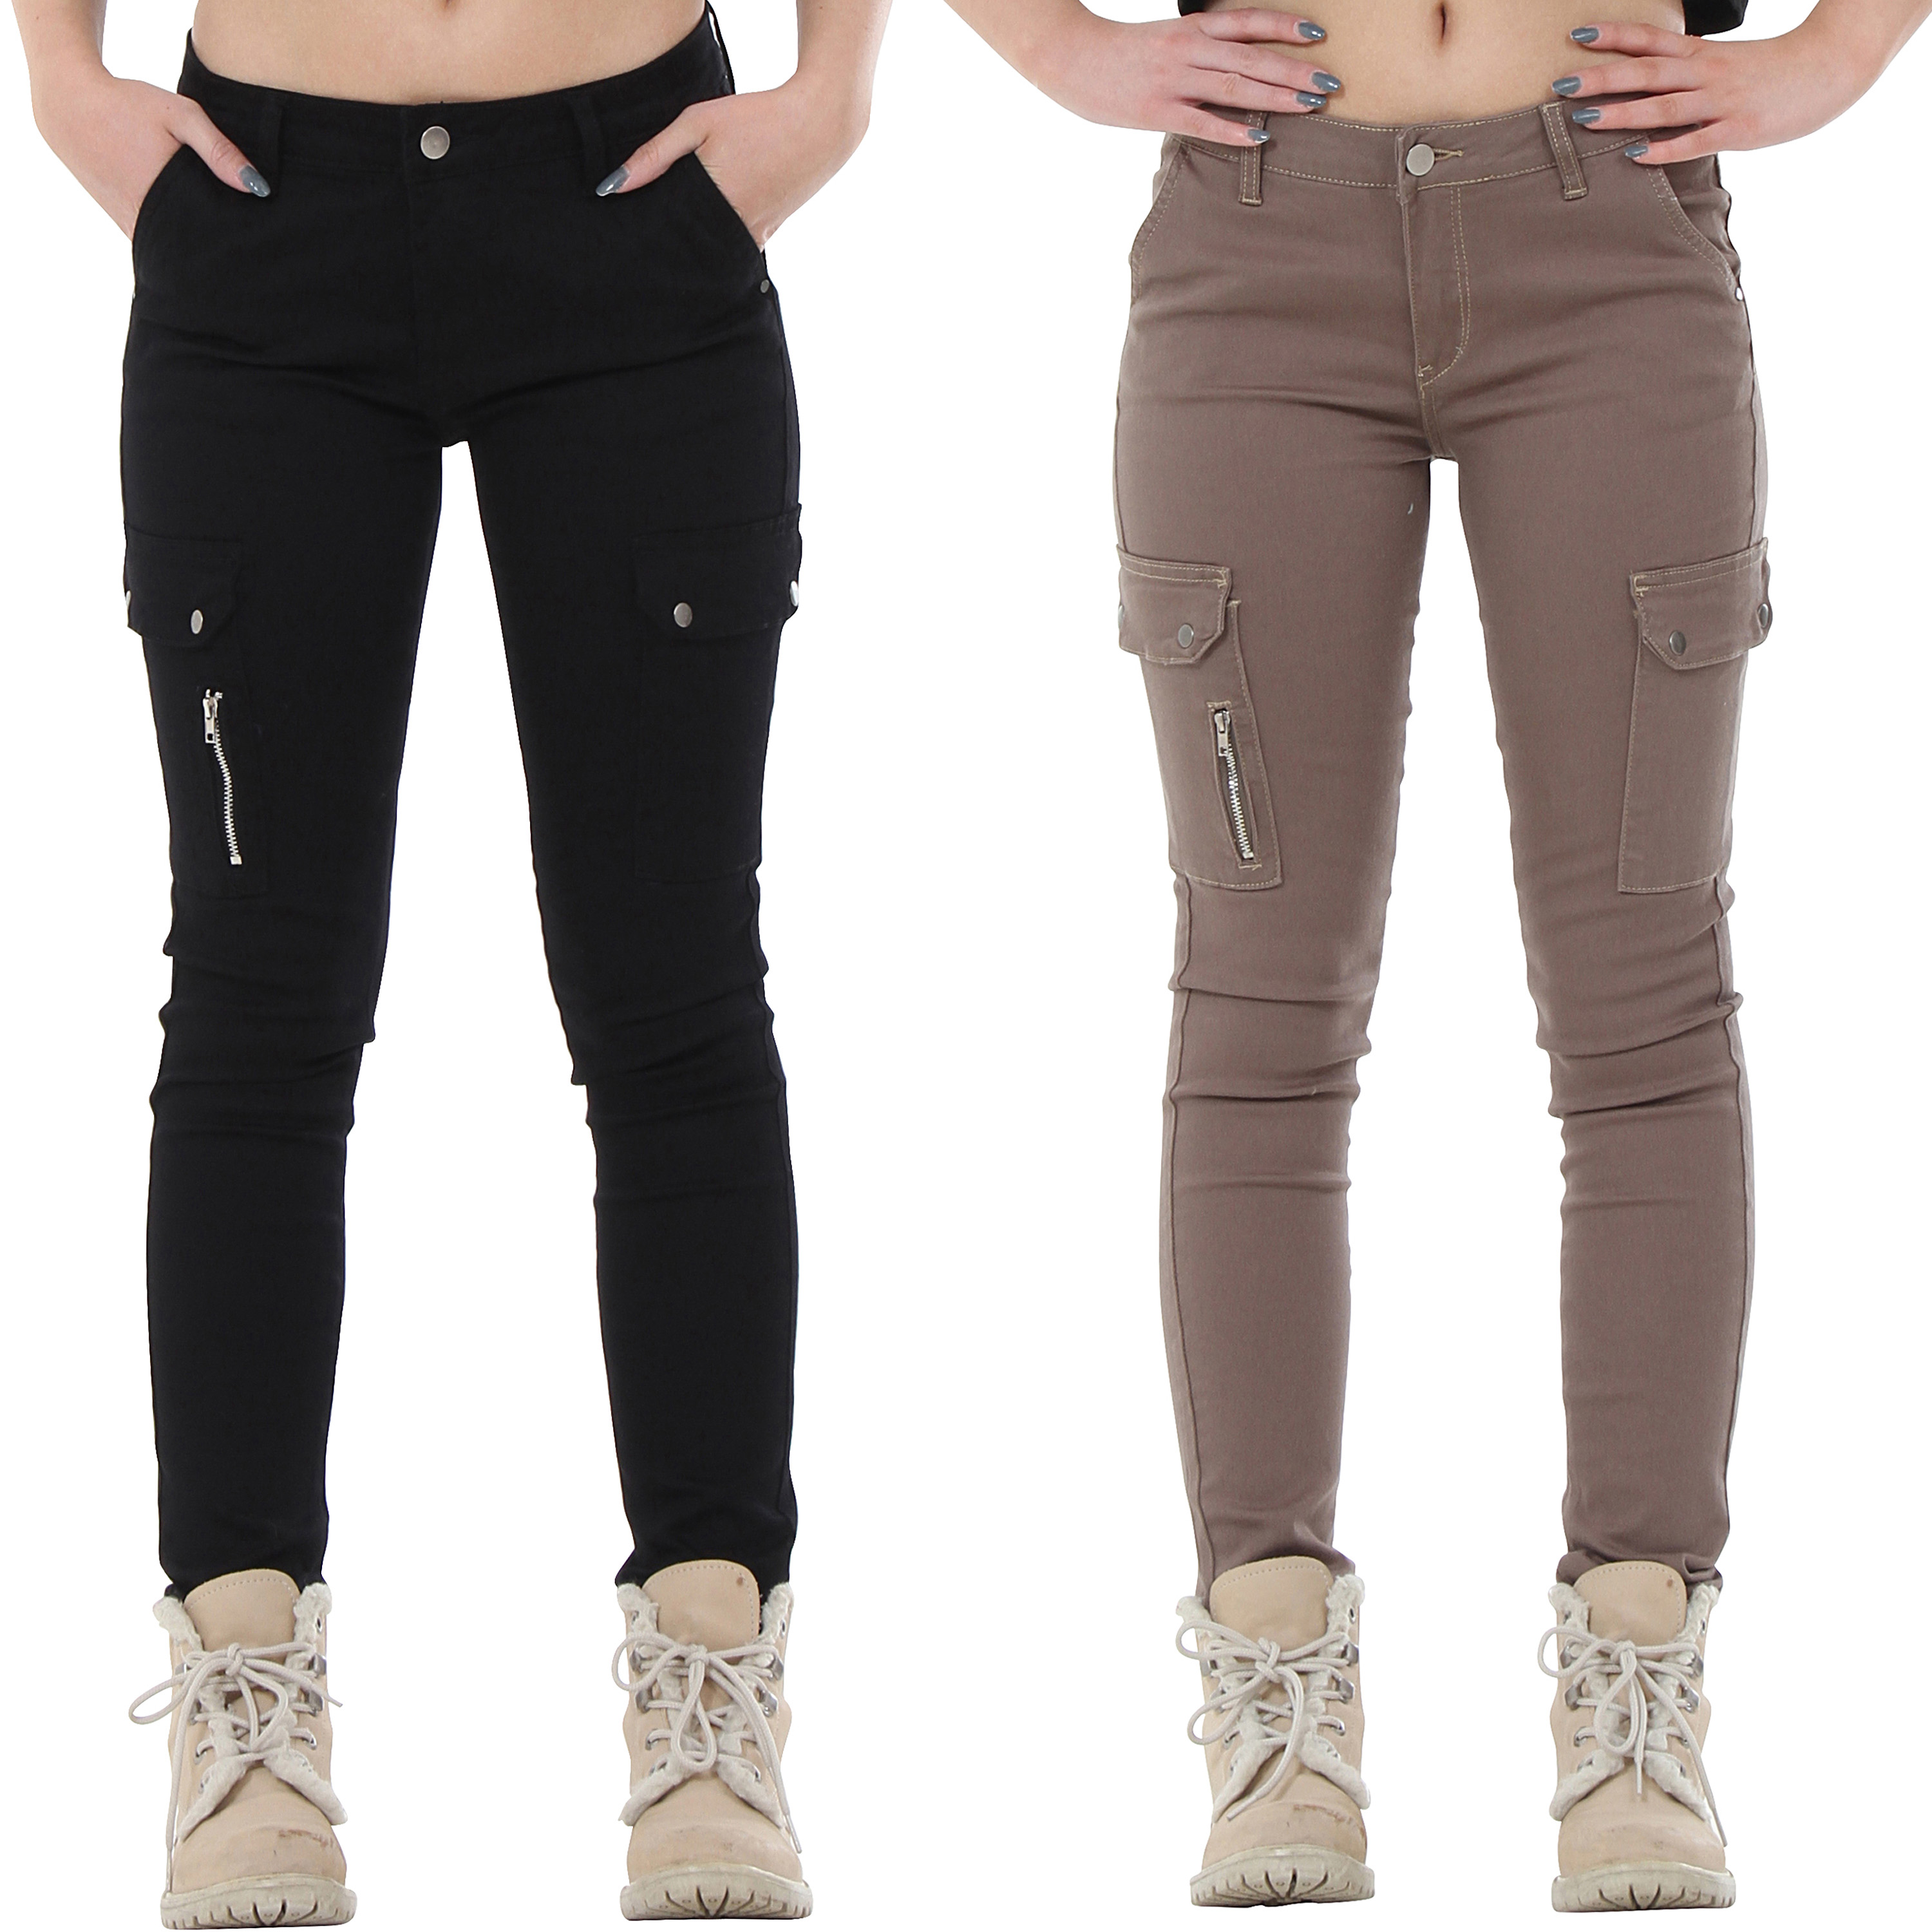 New Womens Ladies Slim Skinny Fitted Combat Pants Cargo Trousers Jeans ...